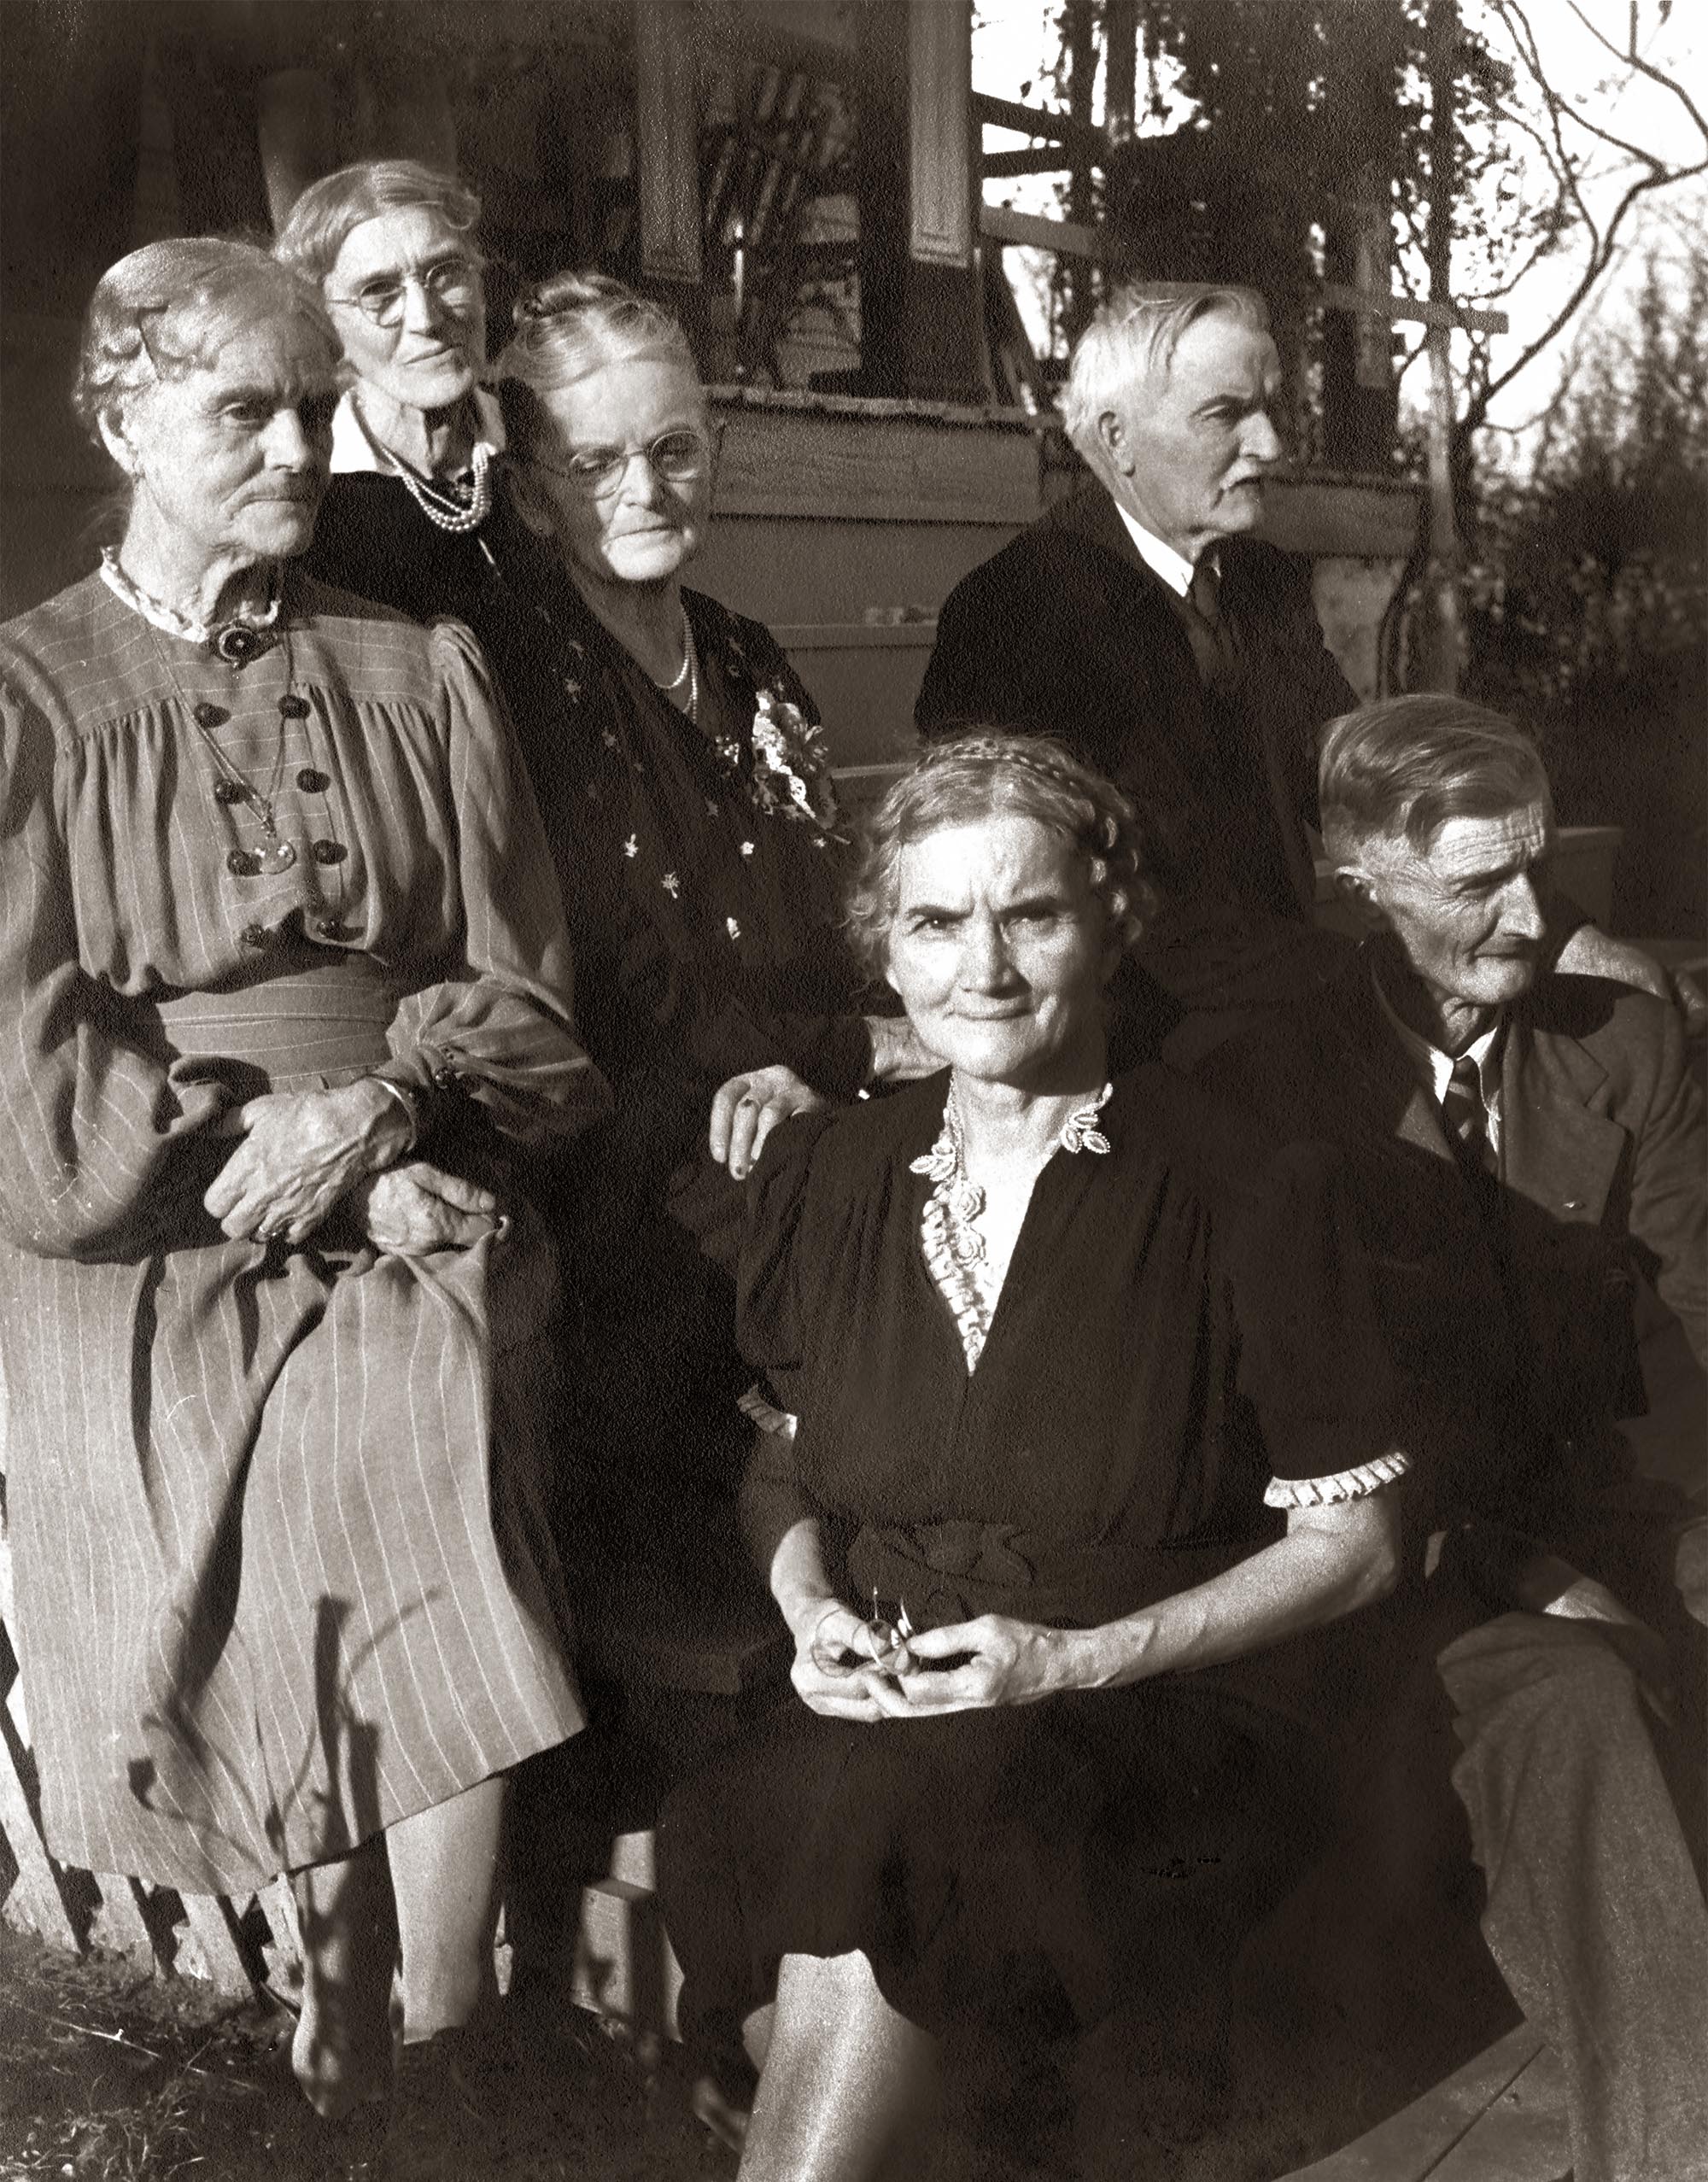 My Dad's Grandmother is surrounded by her brothers and sisters at her parents' home near Elkton, Virginia in 1940. Born during or soon after the Civil War and living beyond the swing era, this generation saw a social transformation and technological advances like no other generation before and maybe arguably since.